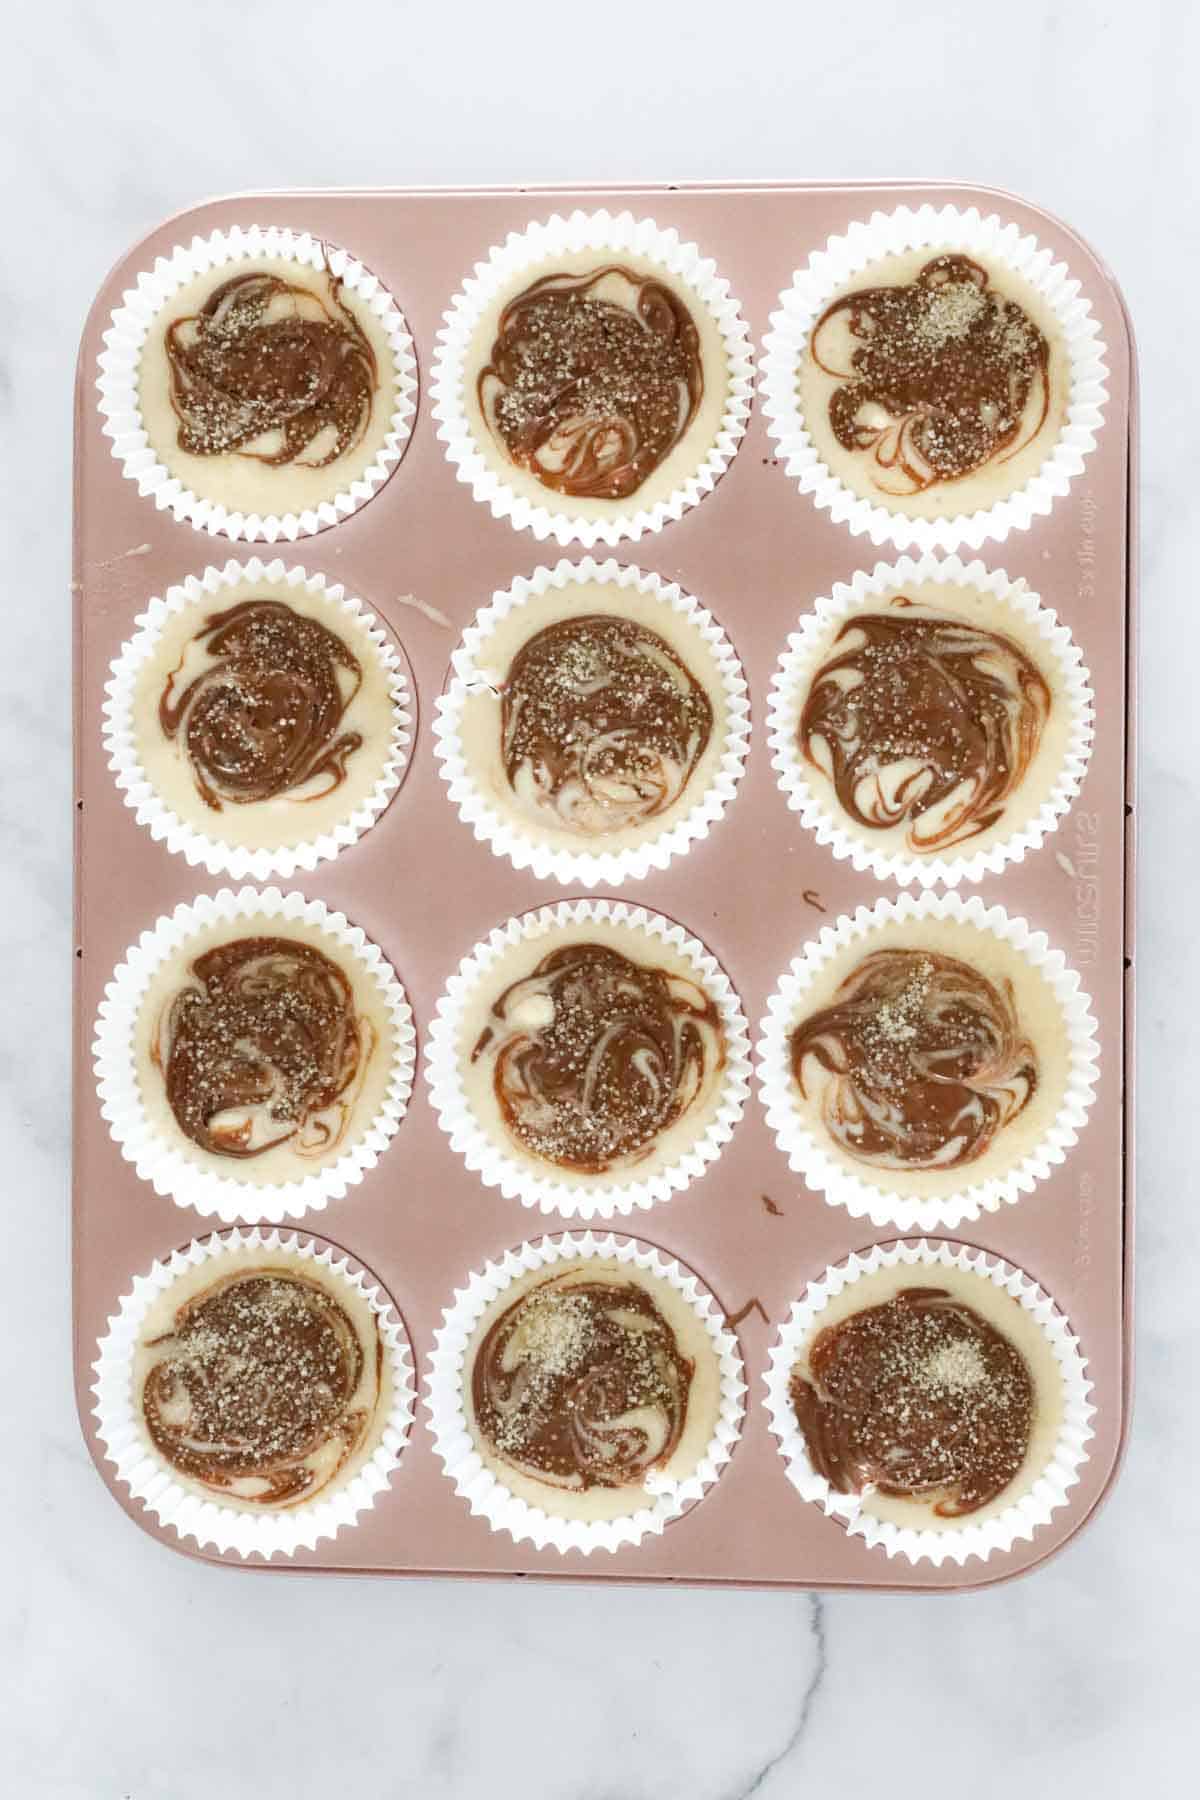 Nutella swirled through muffin batter and sugar sprinkled on top.